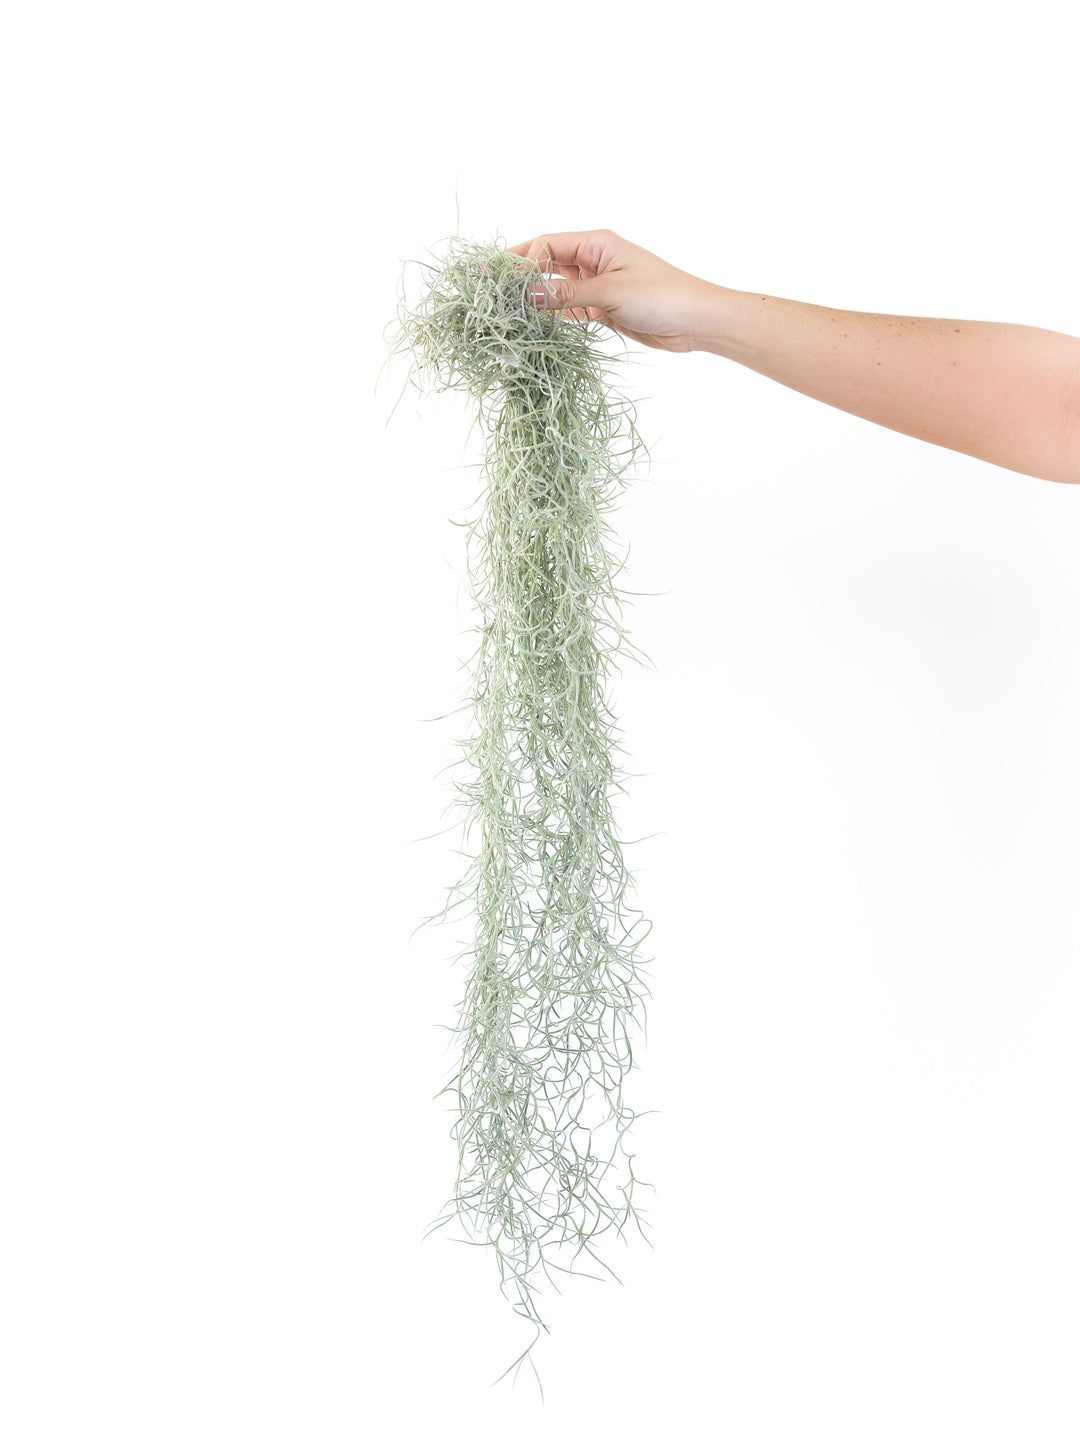 Colombia Thick Spanish Moss - Tillandsia Usneoides - Large Clump